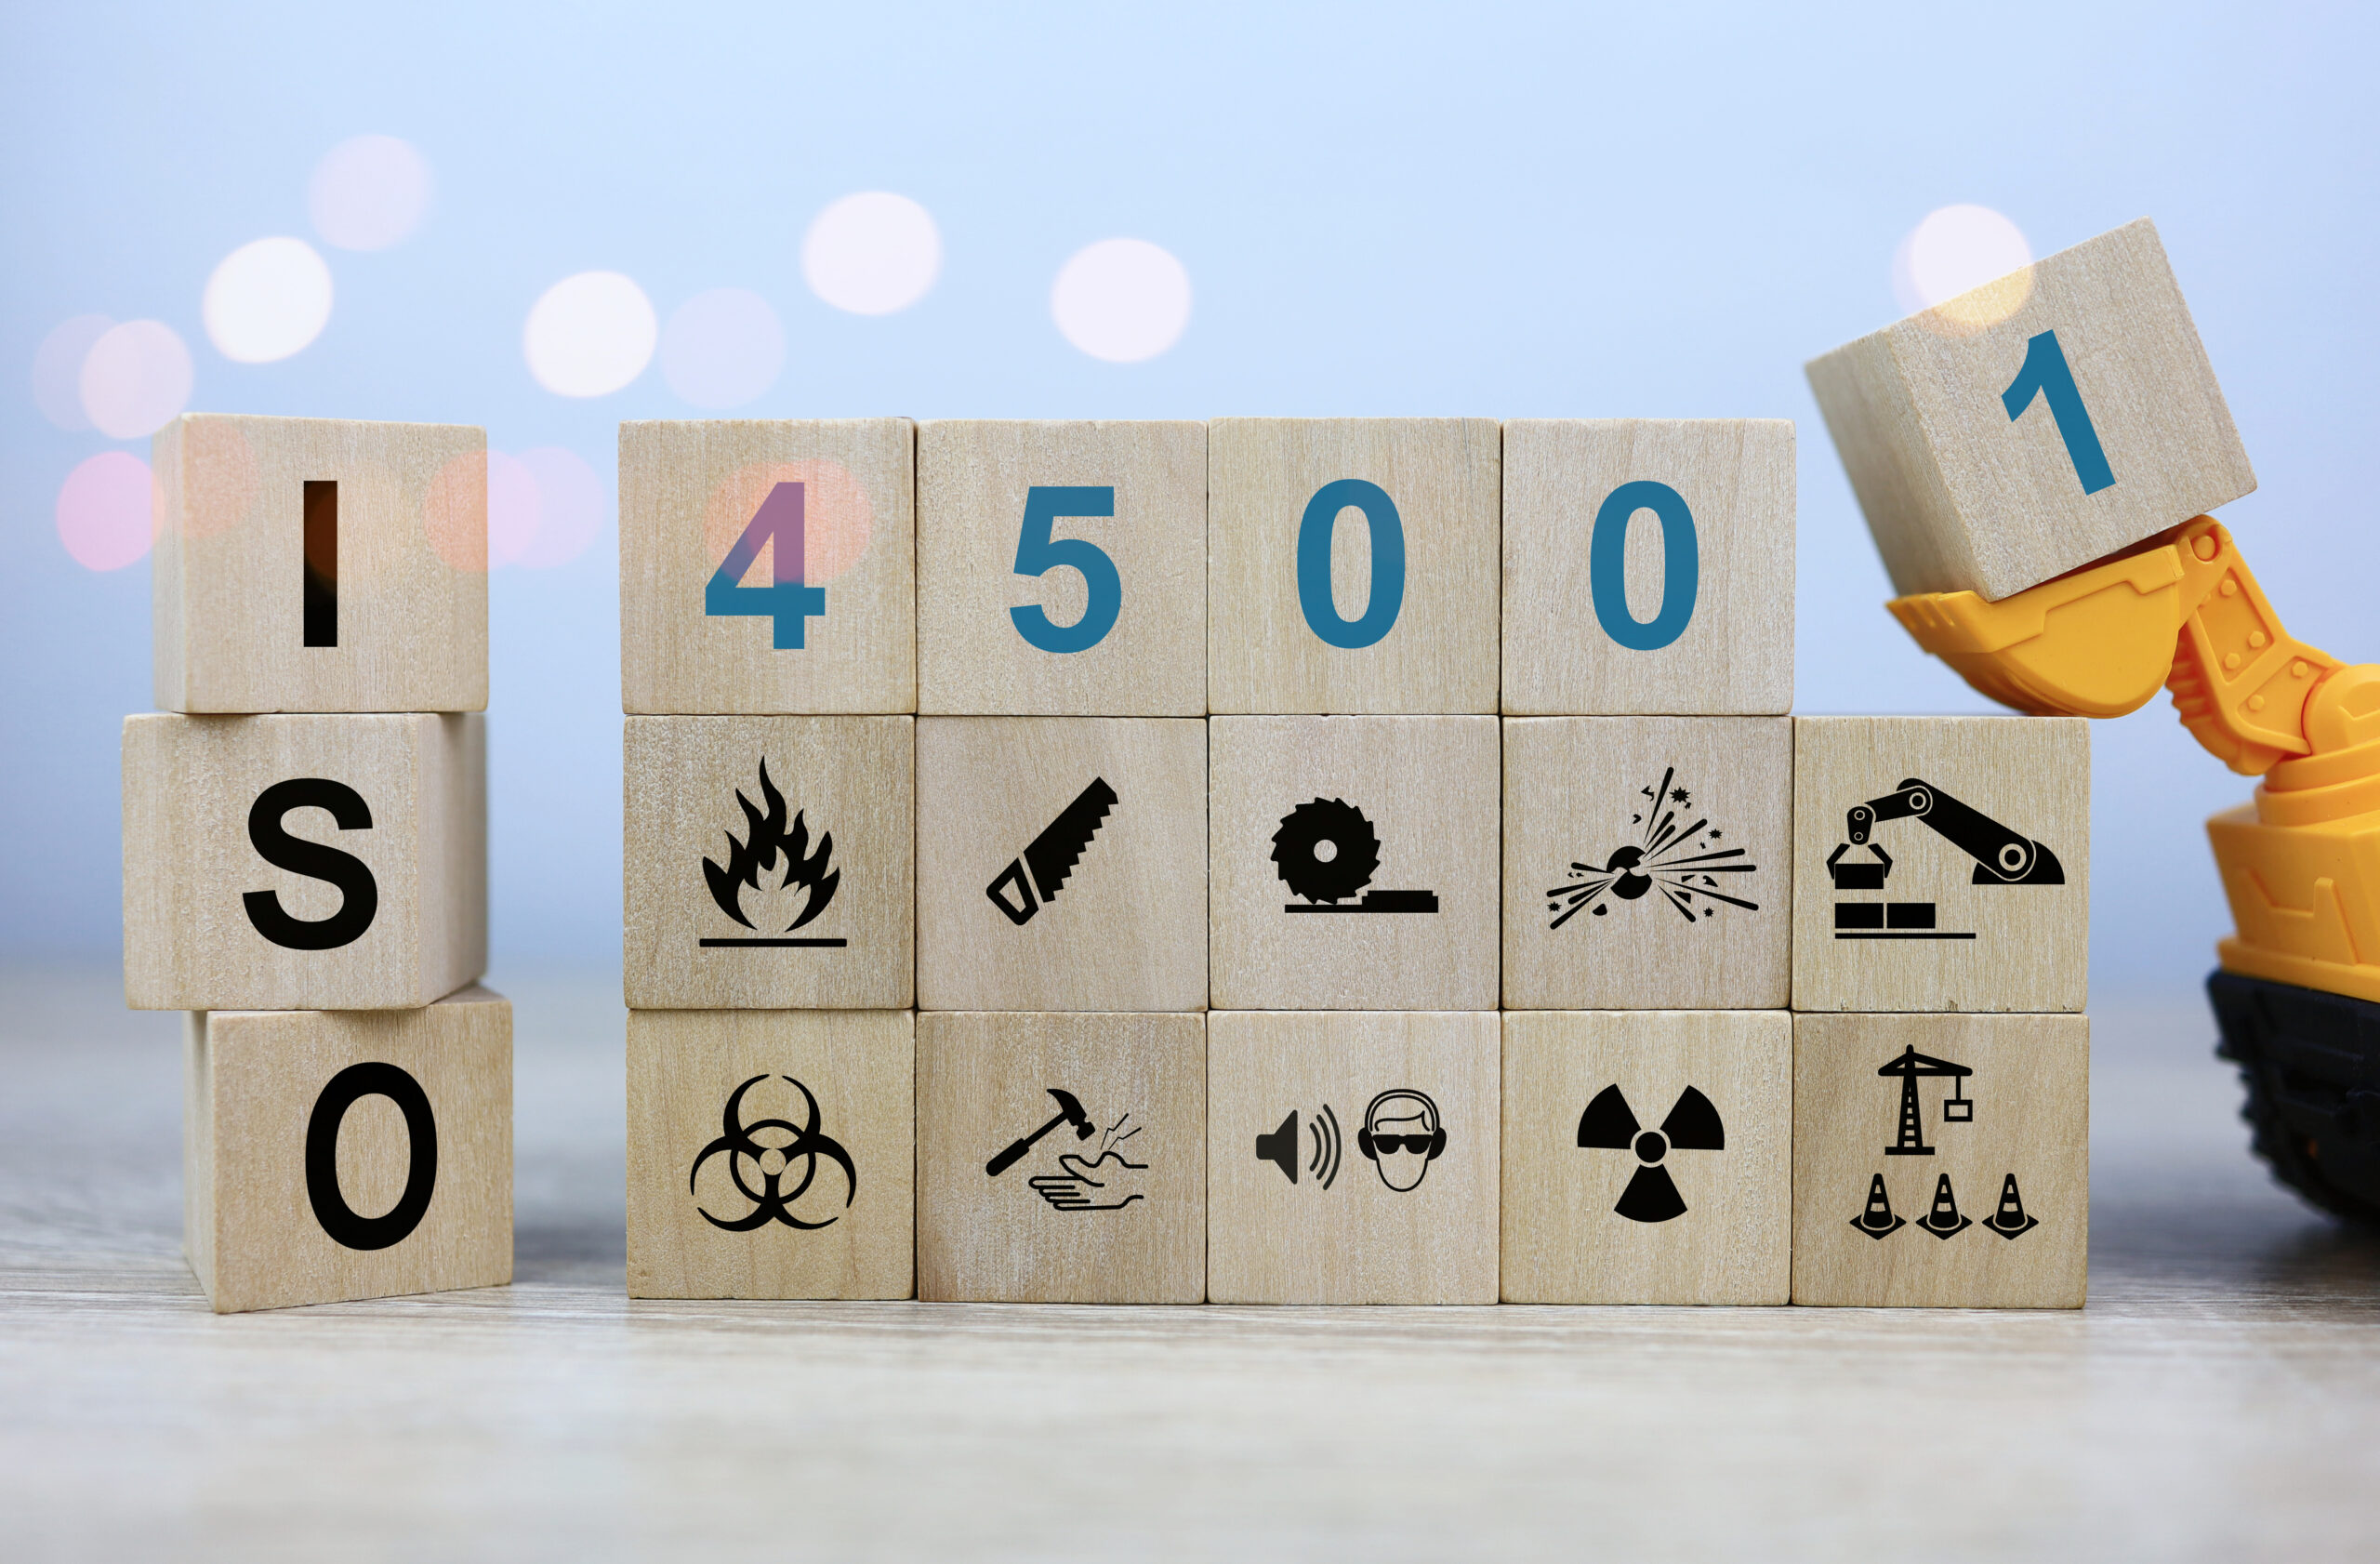 iso 45001 is a workplace safety standard that deals with the health and safety of employees. Standard icons and safety symbols on square wooden dice.